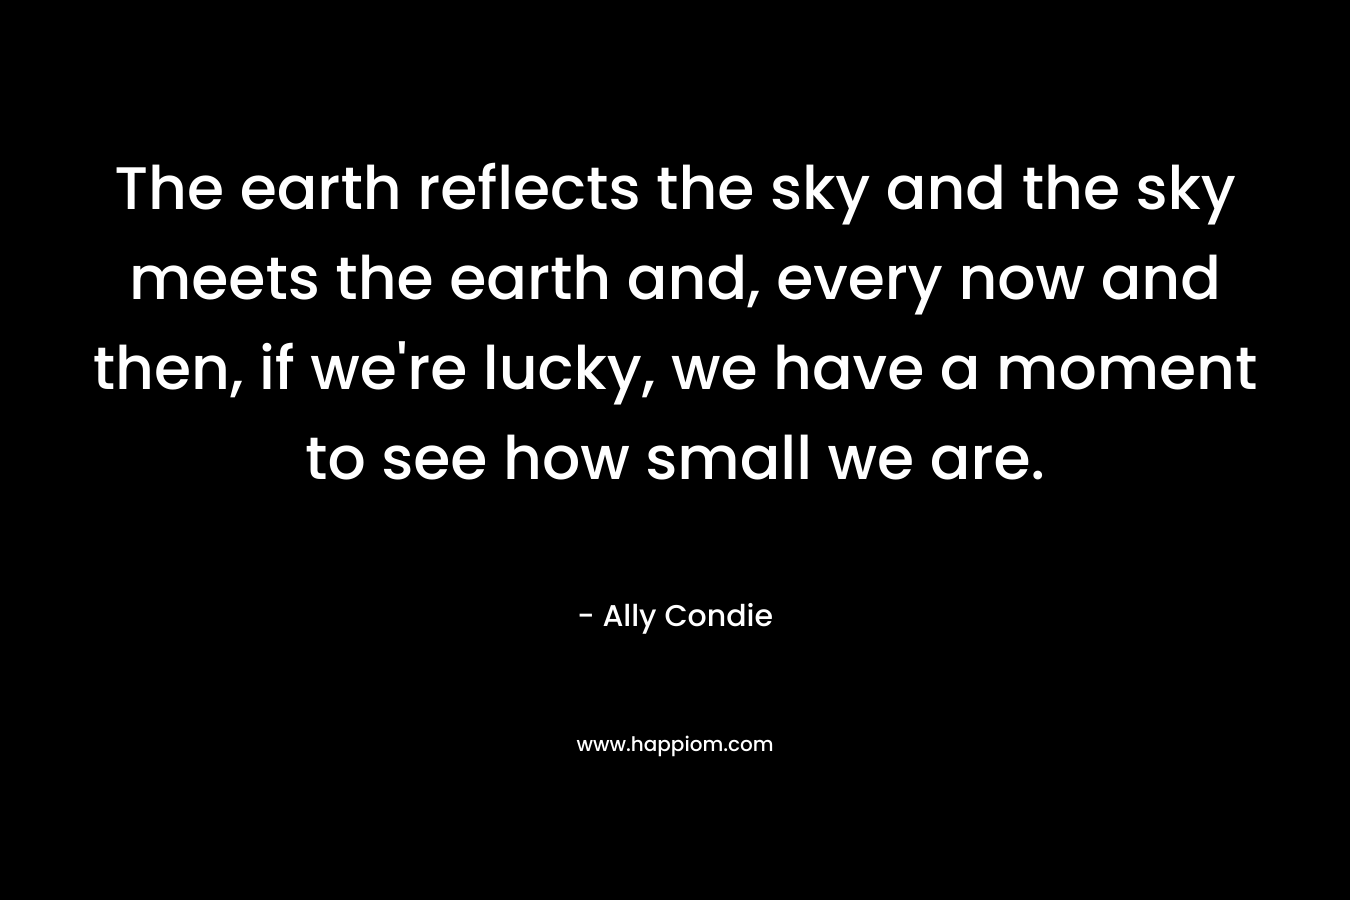 The earth reflects the sky and the sky meets the earth and, every now and then, if we’re lucky, we have a moment to see how small we are. – Ally Condie